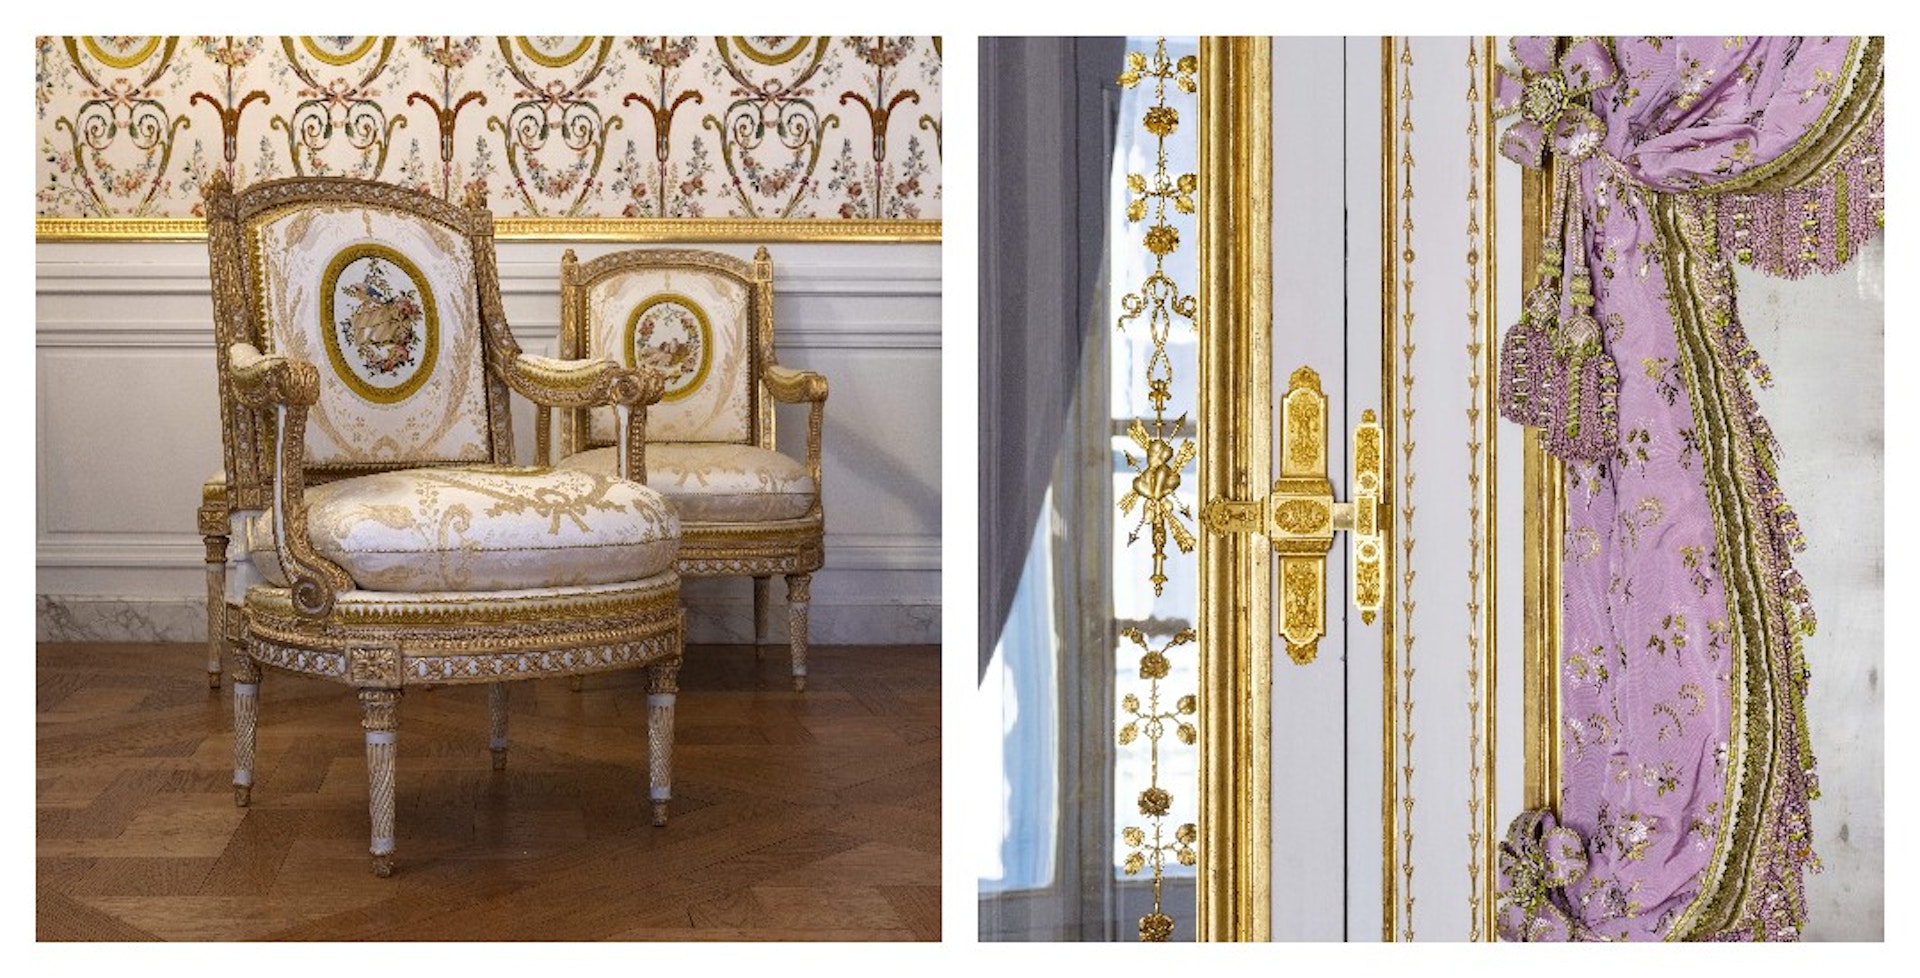 A collage of a chair and curtains from Marie-Antoinette’s chambers at the Château de Versailles, Île-de-France, France